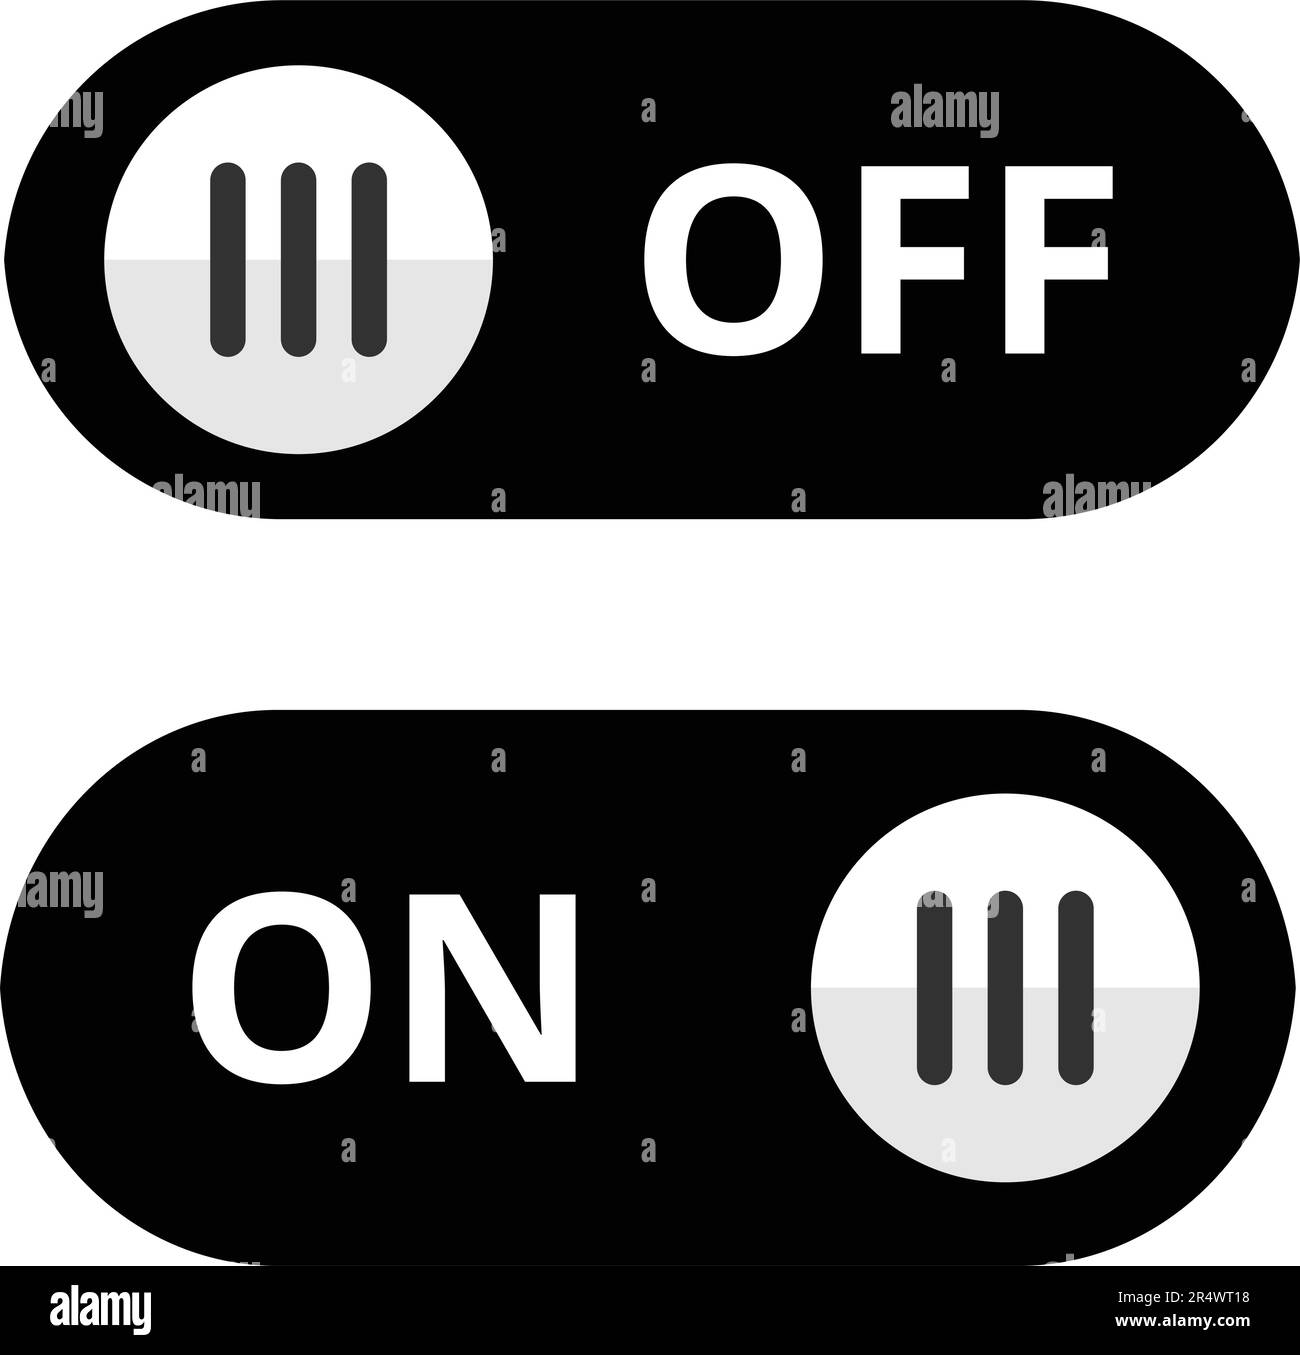 On and off black silhouette button vector illustration Stock Vector